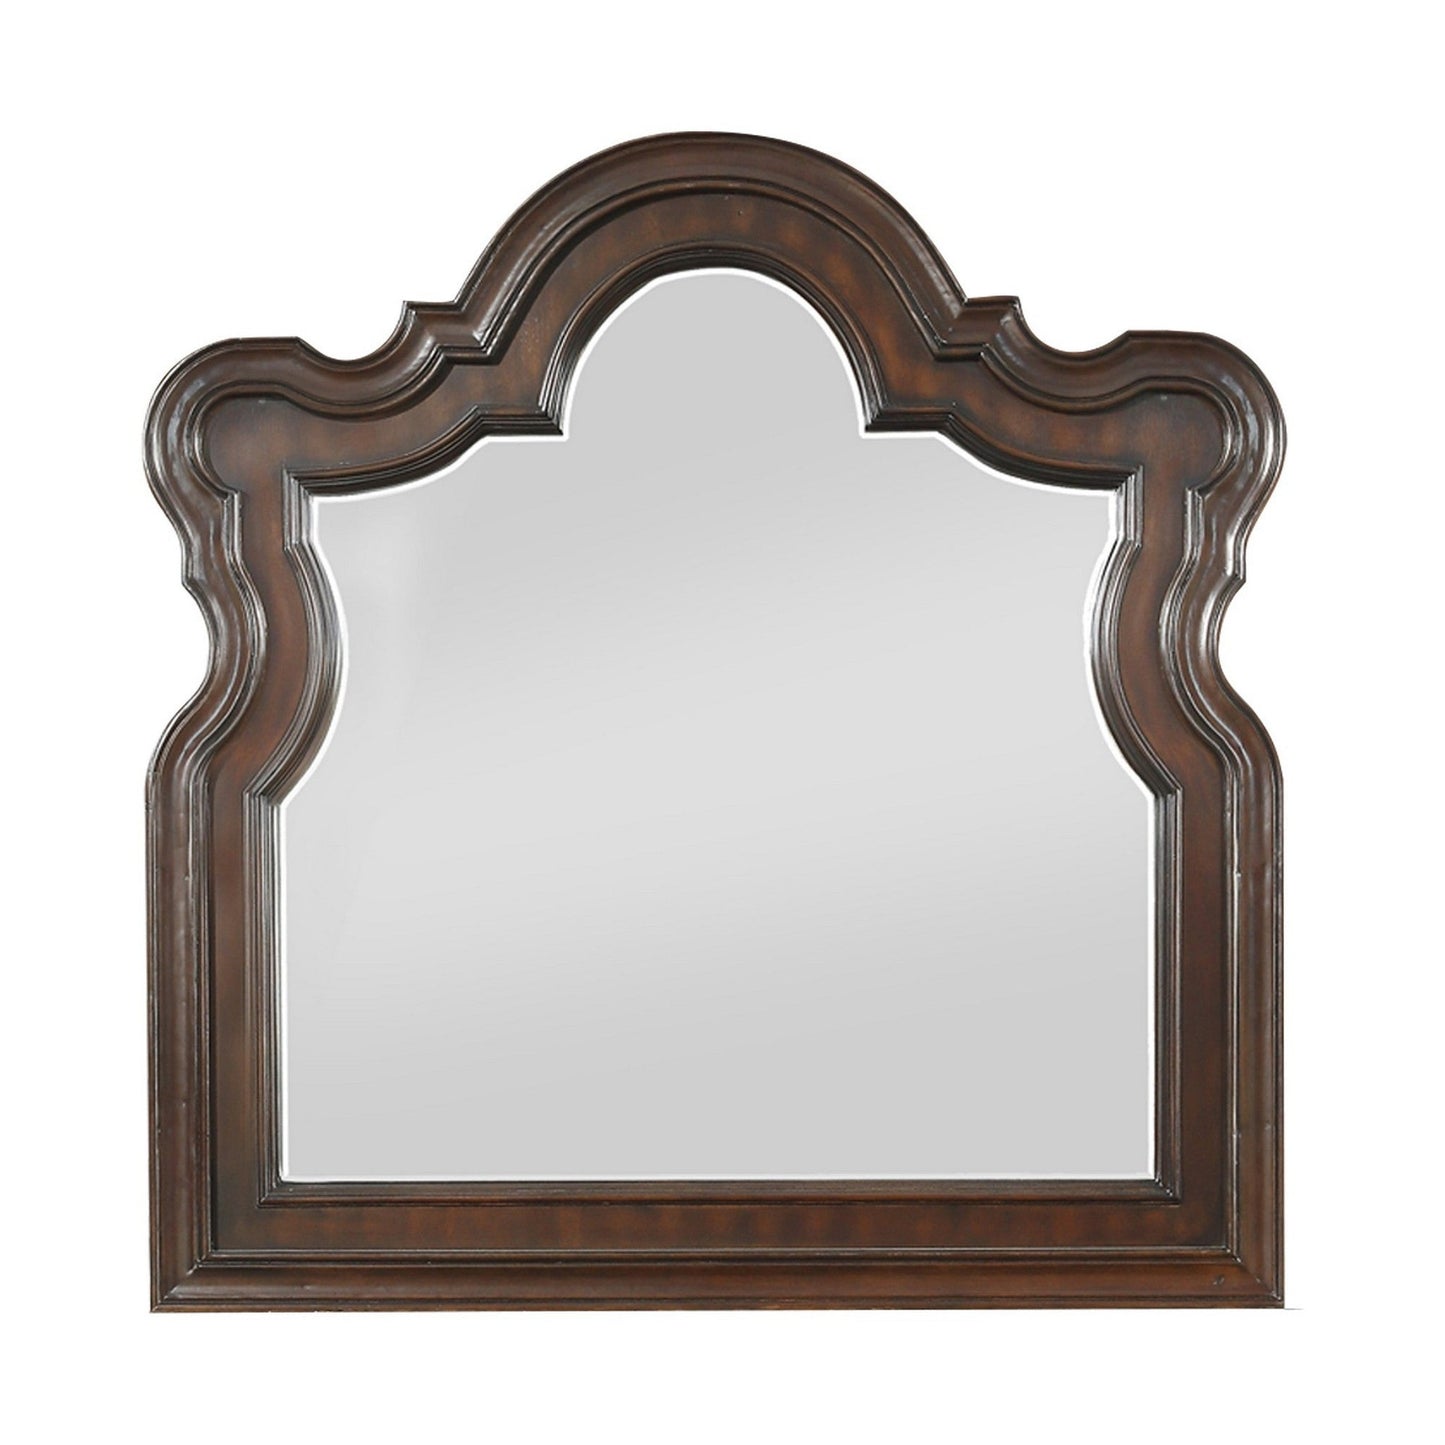 Benzara Brown and Silver Scalloped Design Wooden Frame Mirror With Molded Details